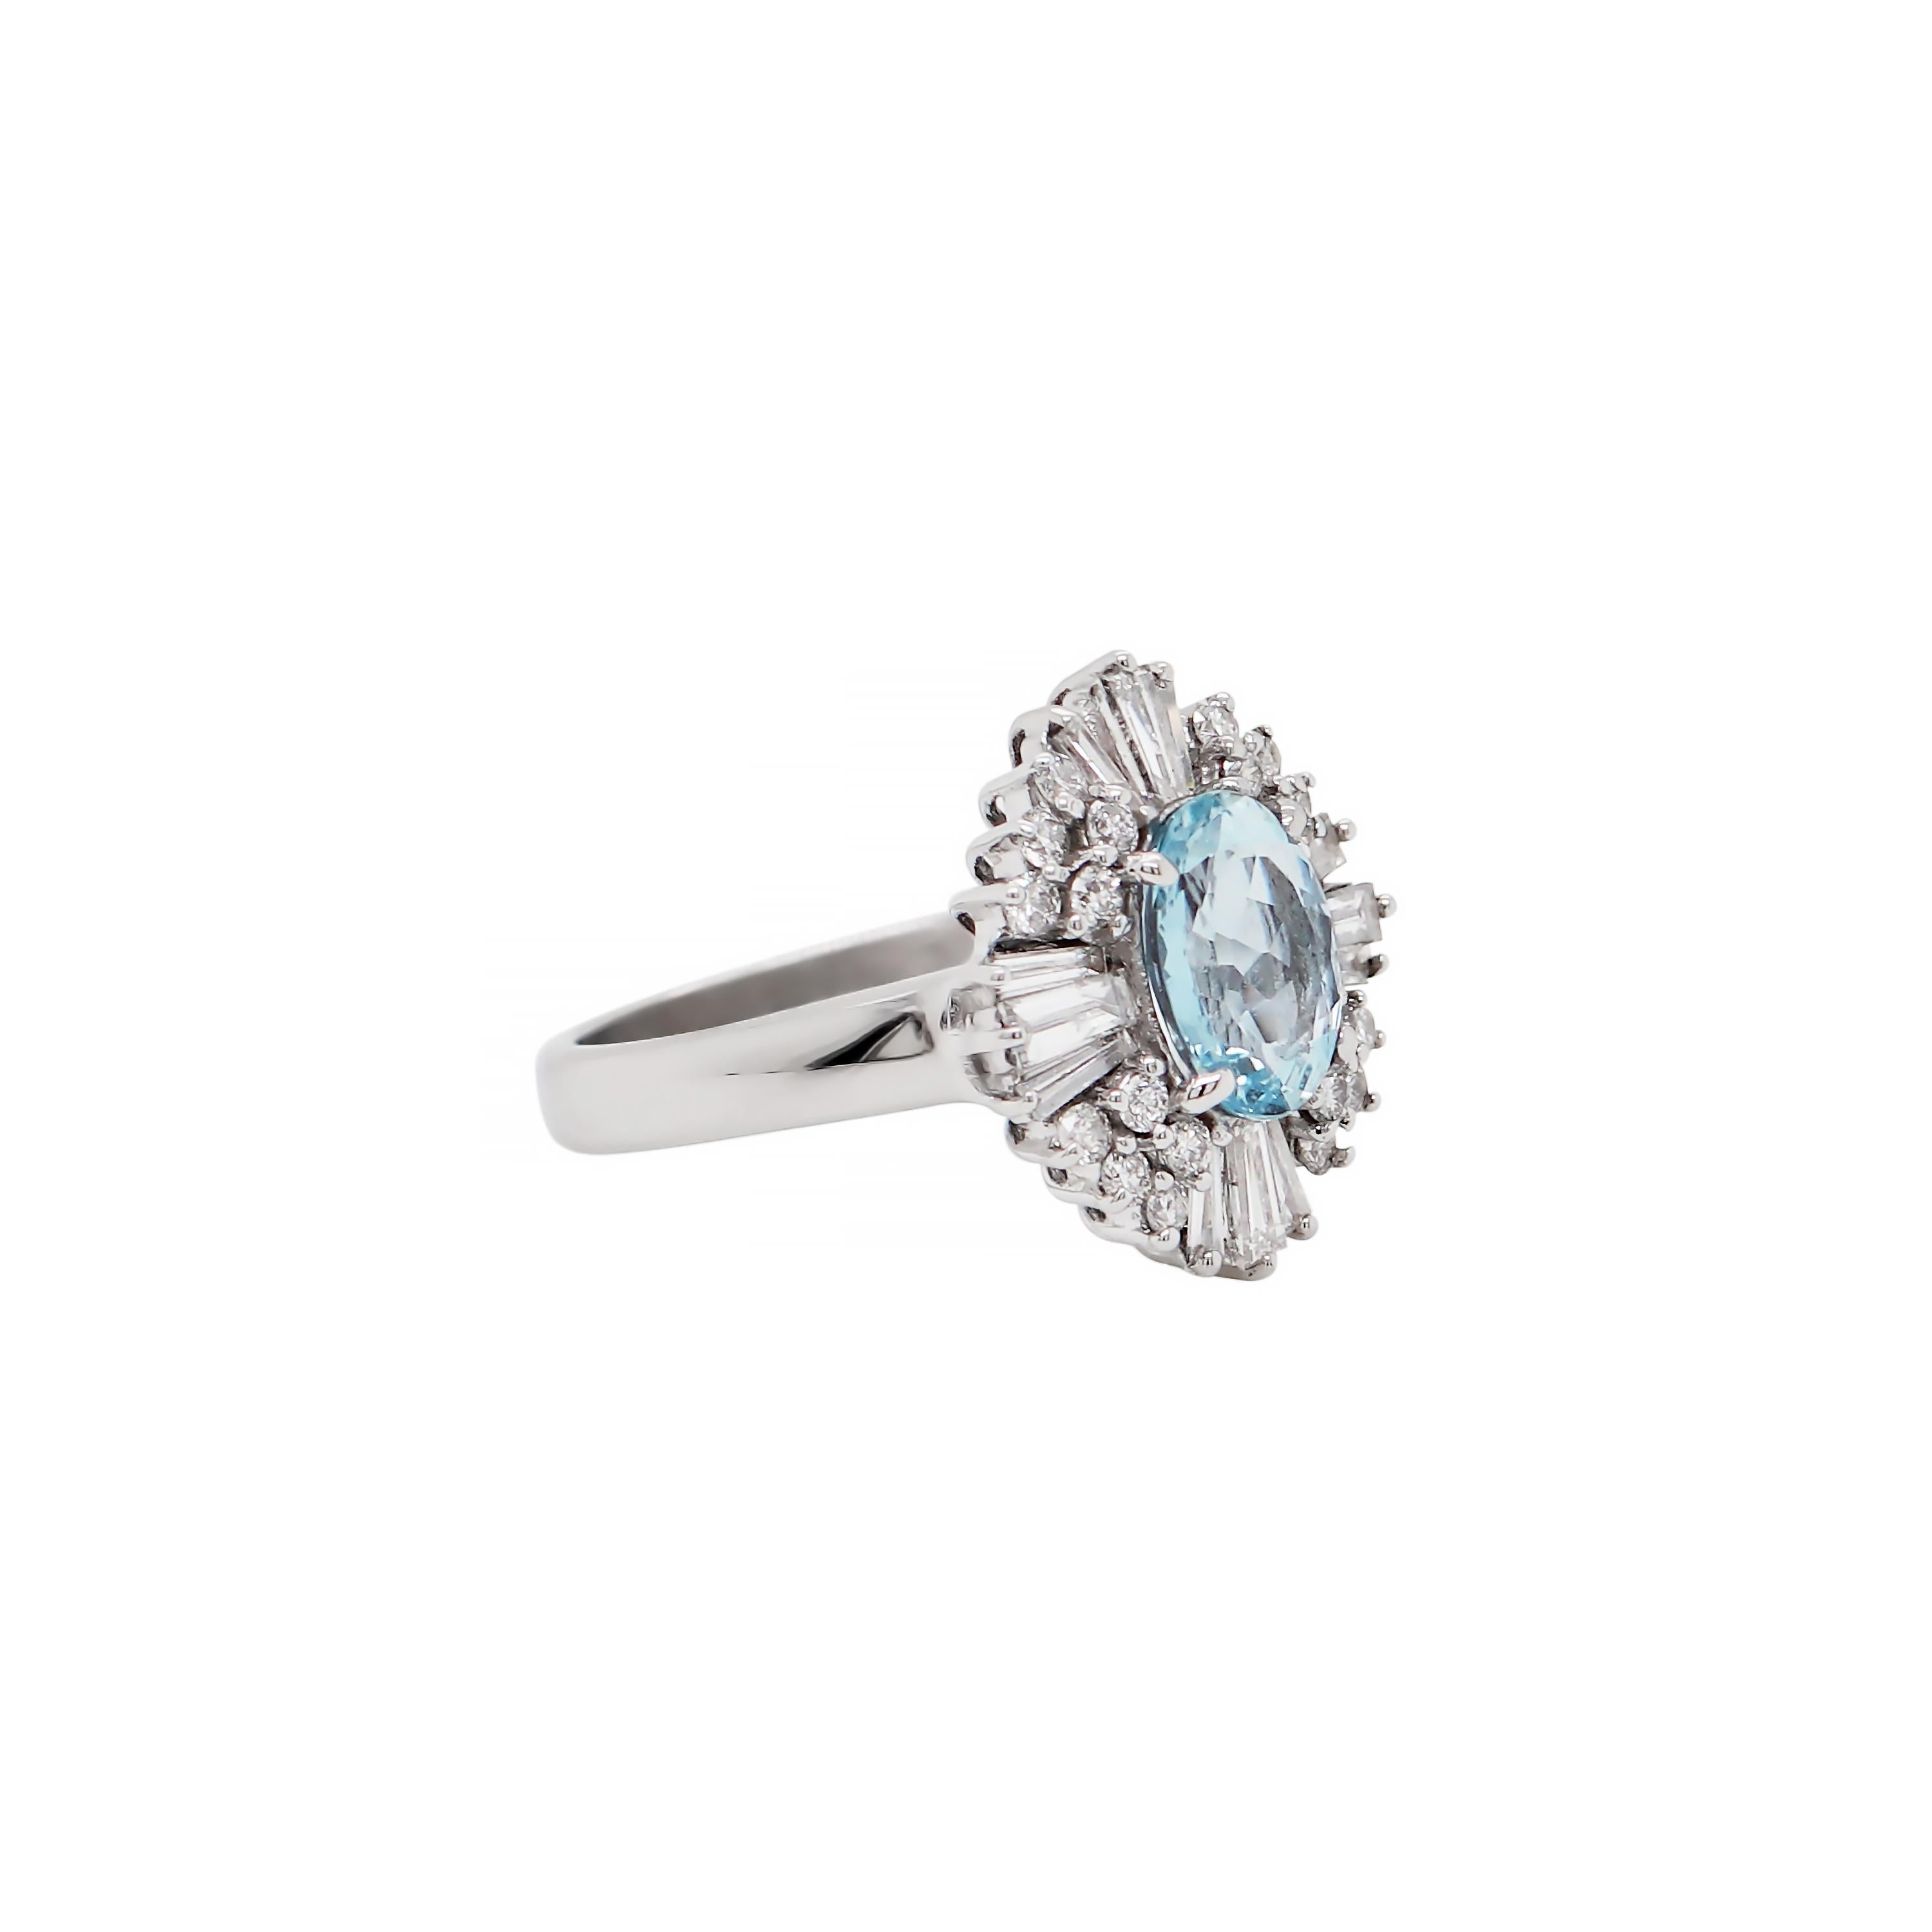 This classic ballerina cluster ring features a beautiful oval aquamarine weighing 1.29ct mounted in a four claw open back setting. The aquamarine is wonderfully surrounded by a mix of tapered banquette cut diamonds and round brilliant cut diamonds